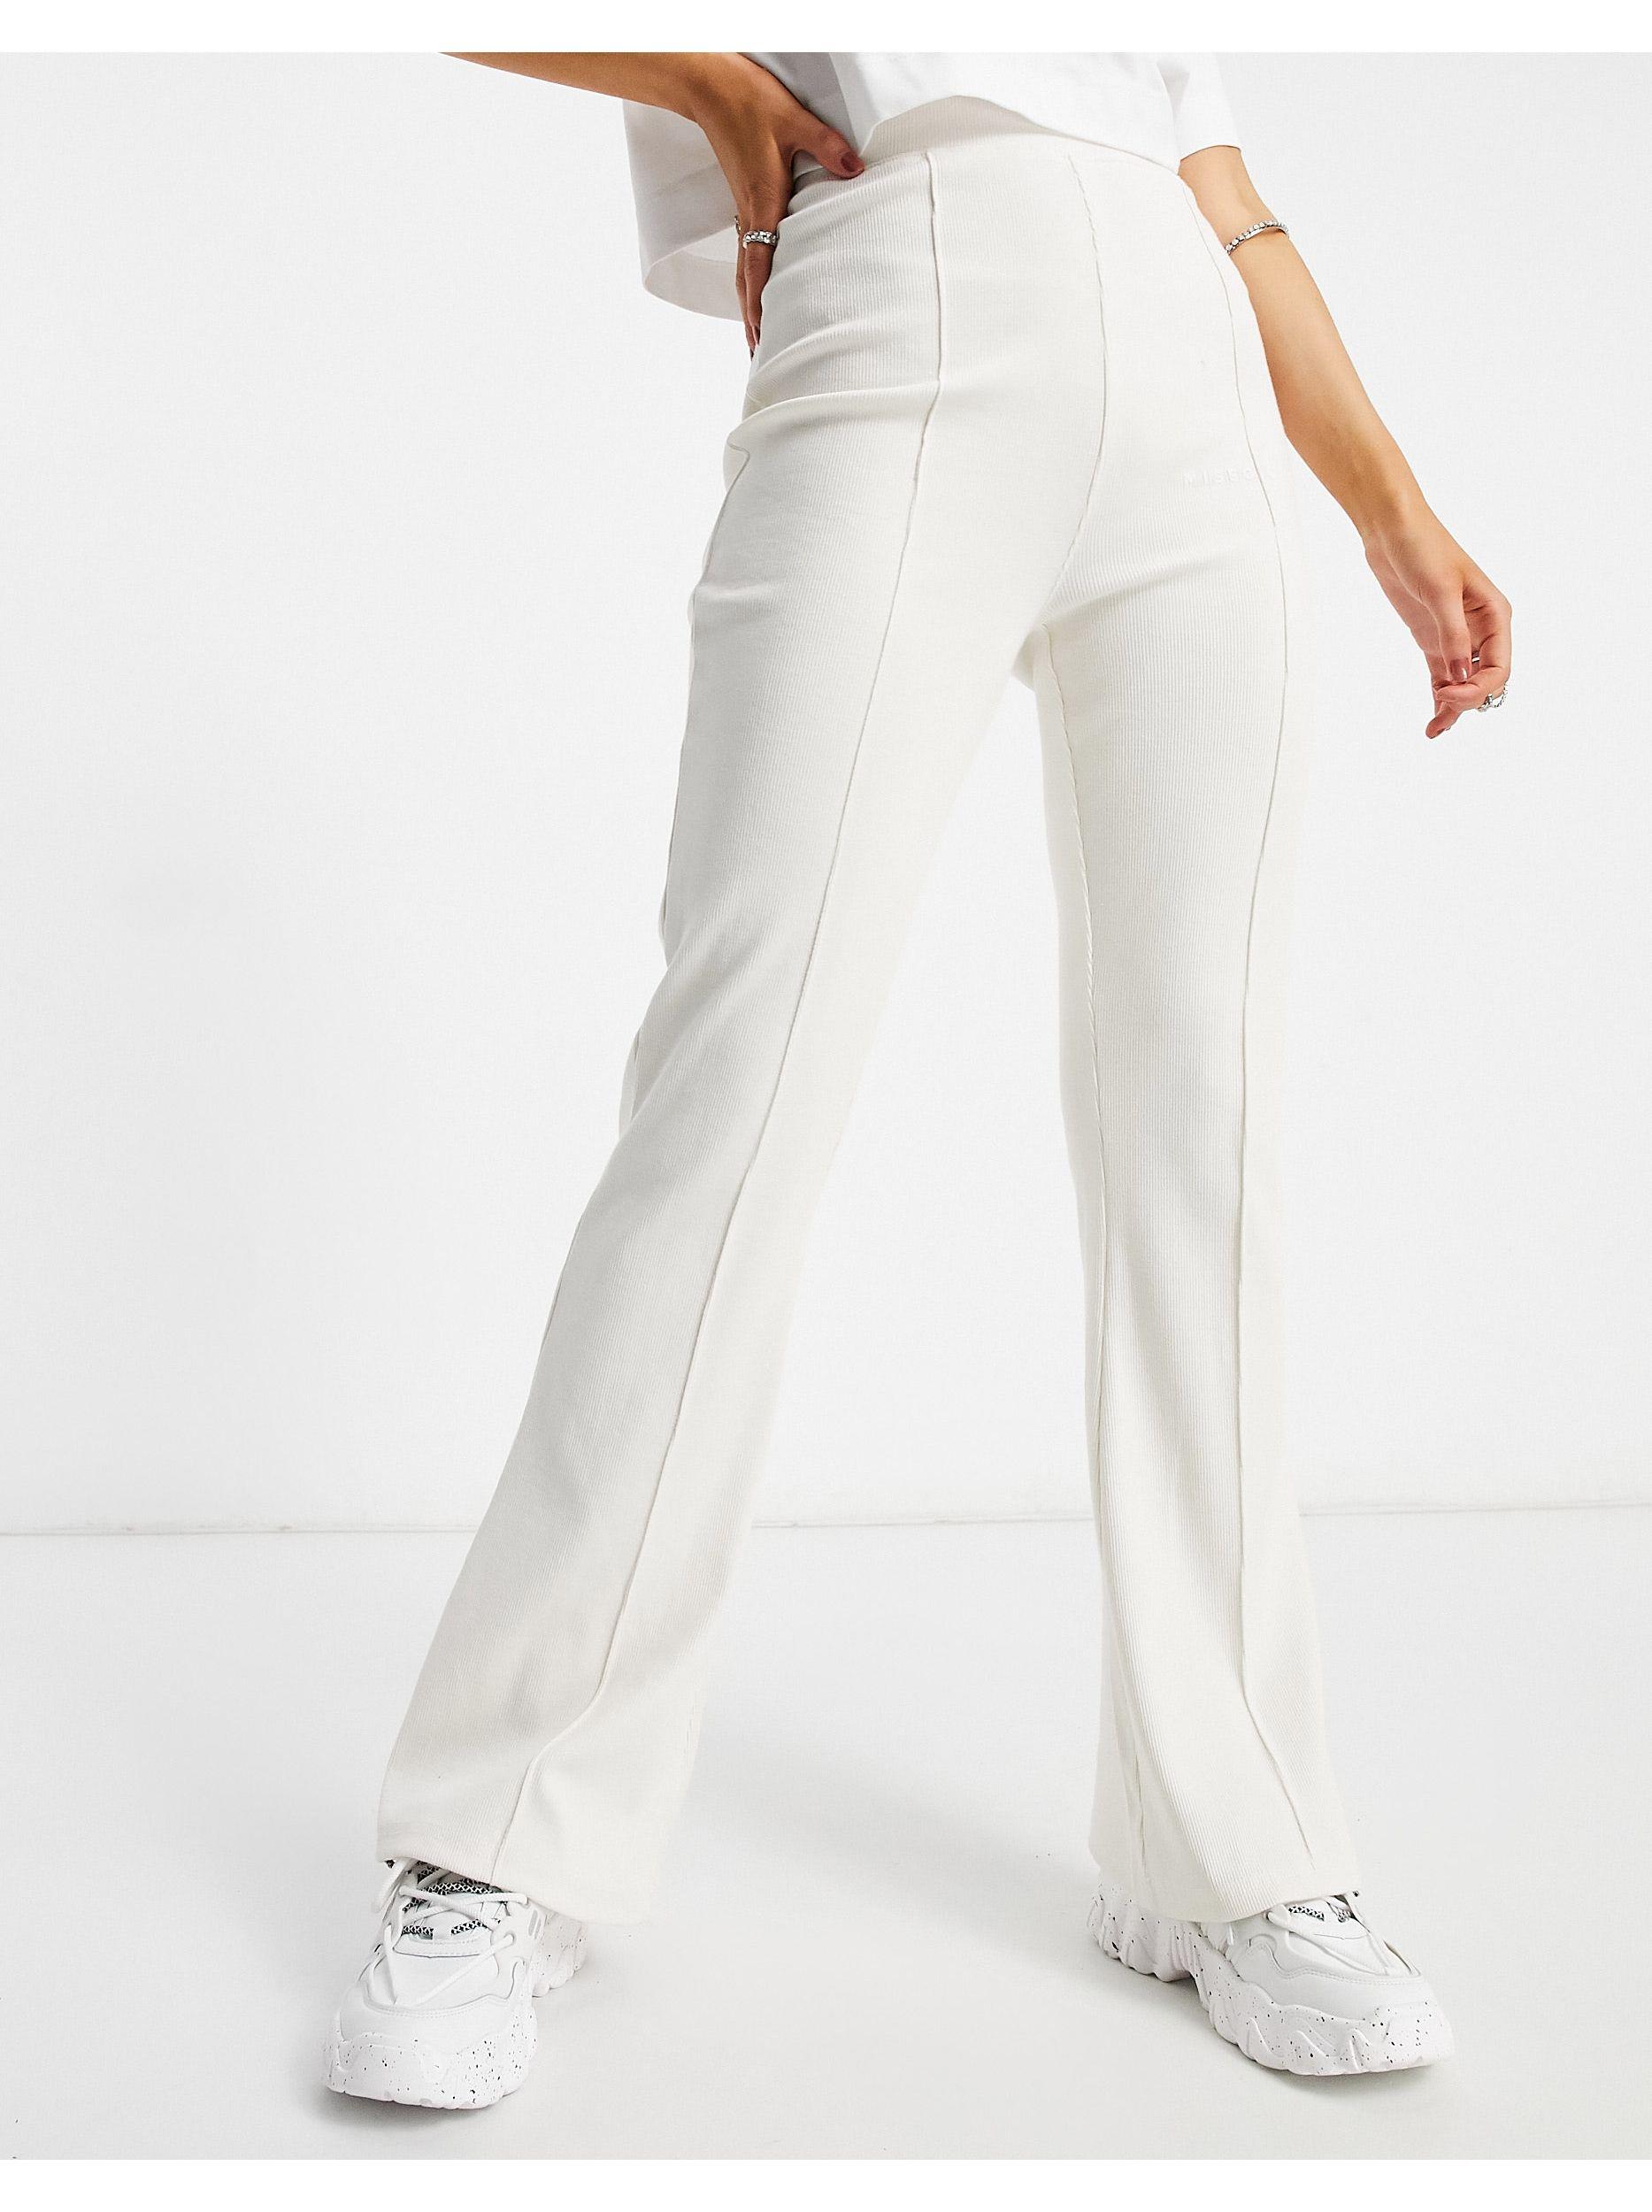 Missguided Co-ord Flared Sweatpants in White | Lyst